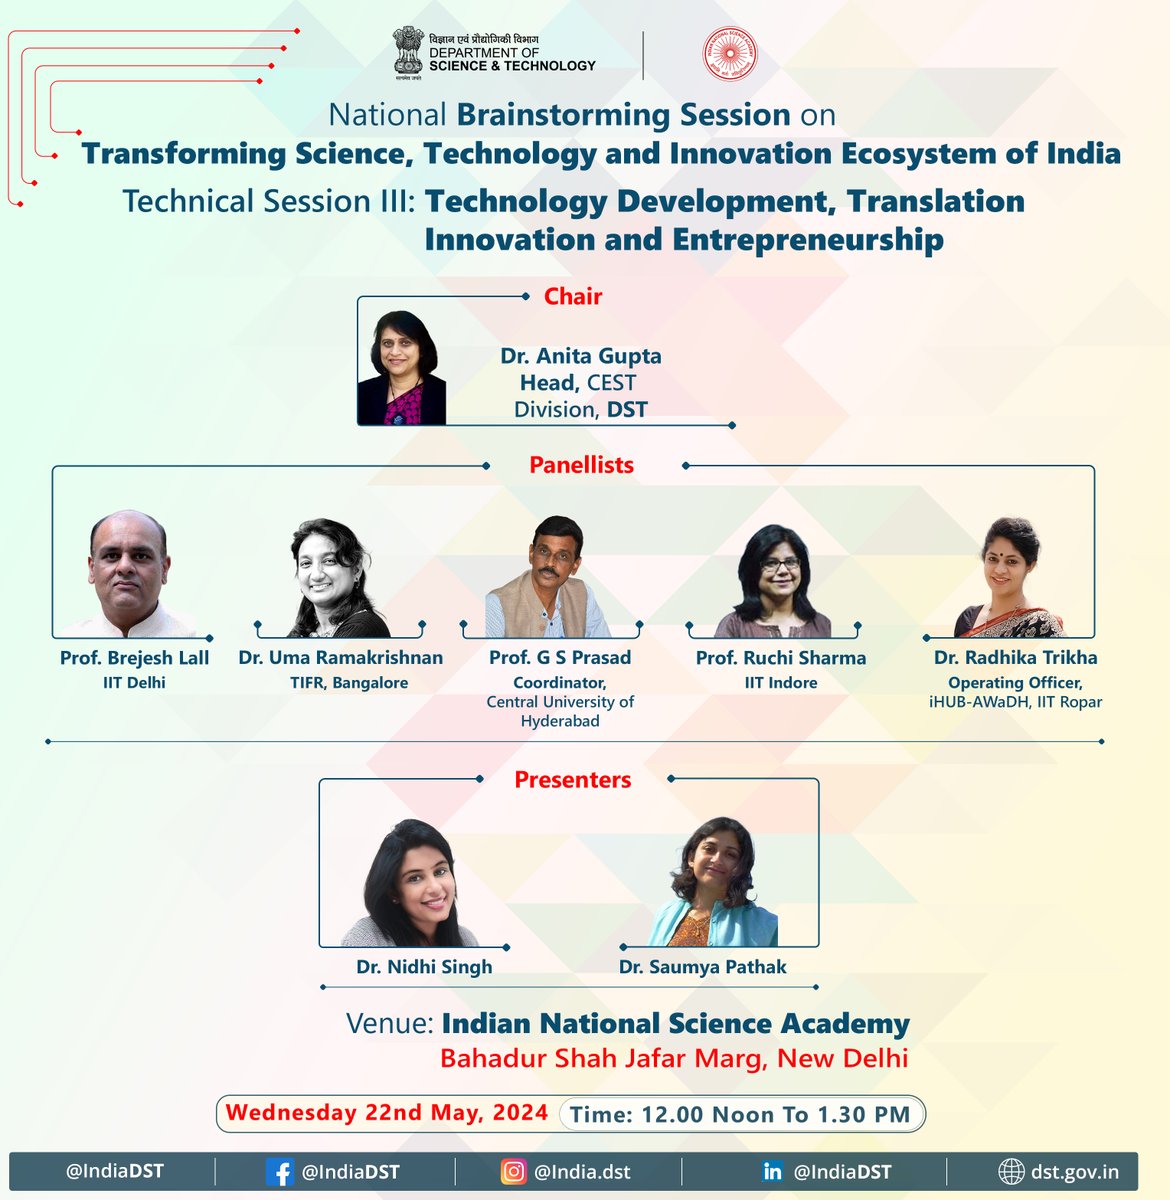 Technical session 3: '#Technology #Development, #Translation, #Innovation & #Entrepreneurship' of National Brainstorming will dwell upon emerging #technologies & disruptive innovations; translational research; tech transfer. 🗓️22 May 2024 ⏲️12 Noon to 1:30 PM 📍INSA, New Delhi